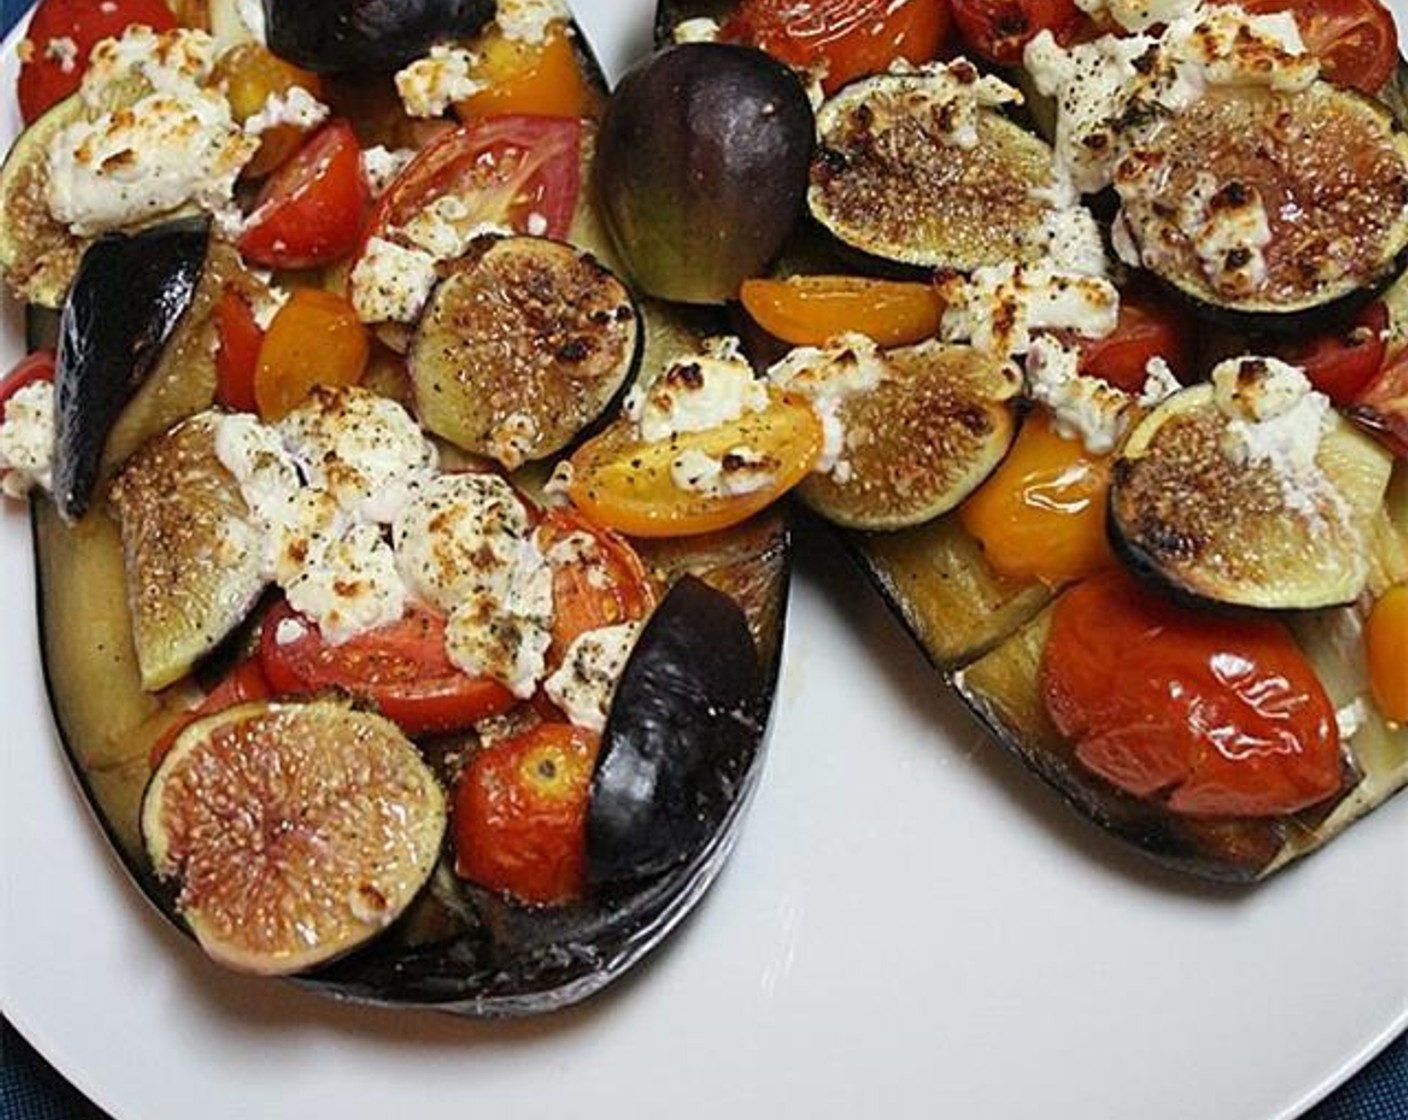 Baked Eggplant with Figs and Cherry Tomatoes